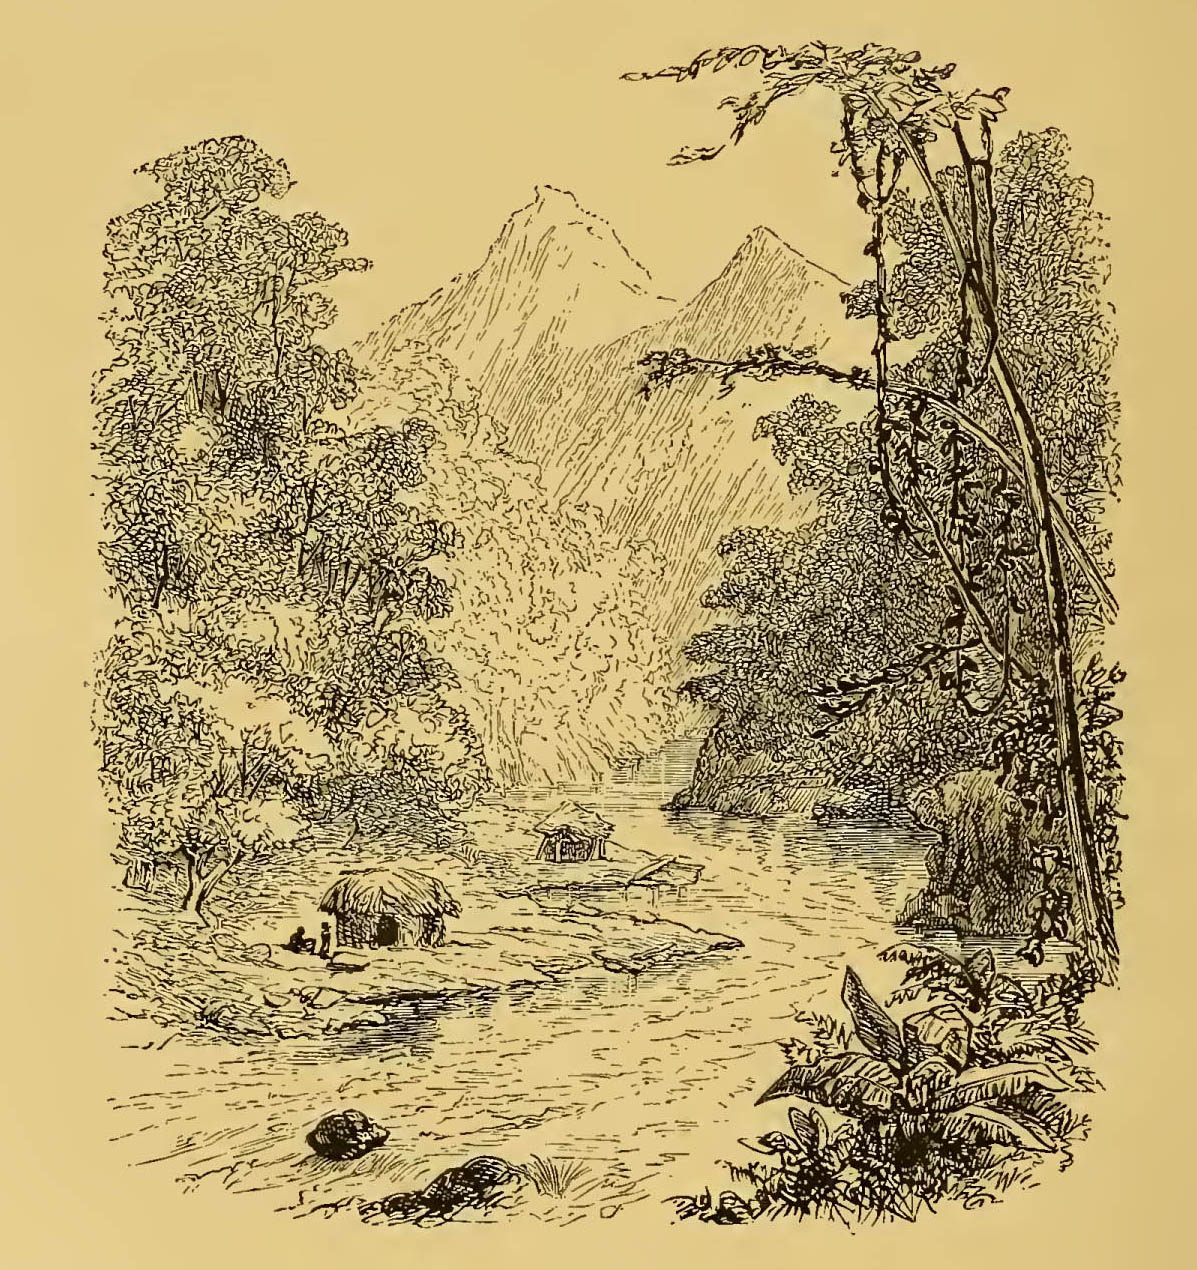 hut by river with mountains in distance